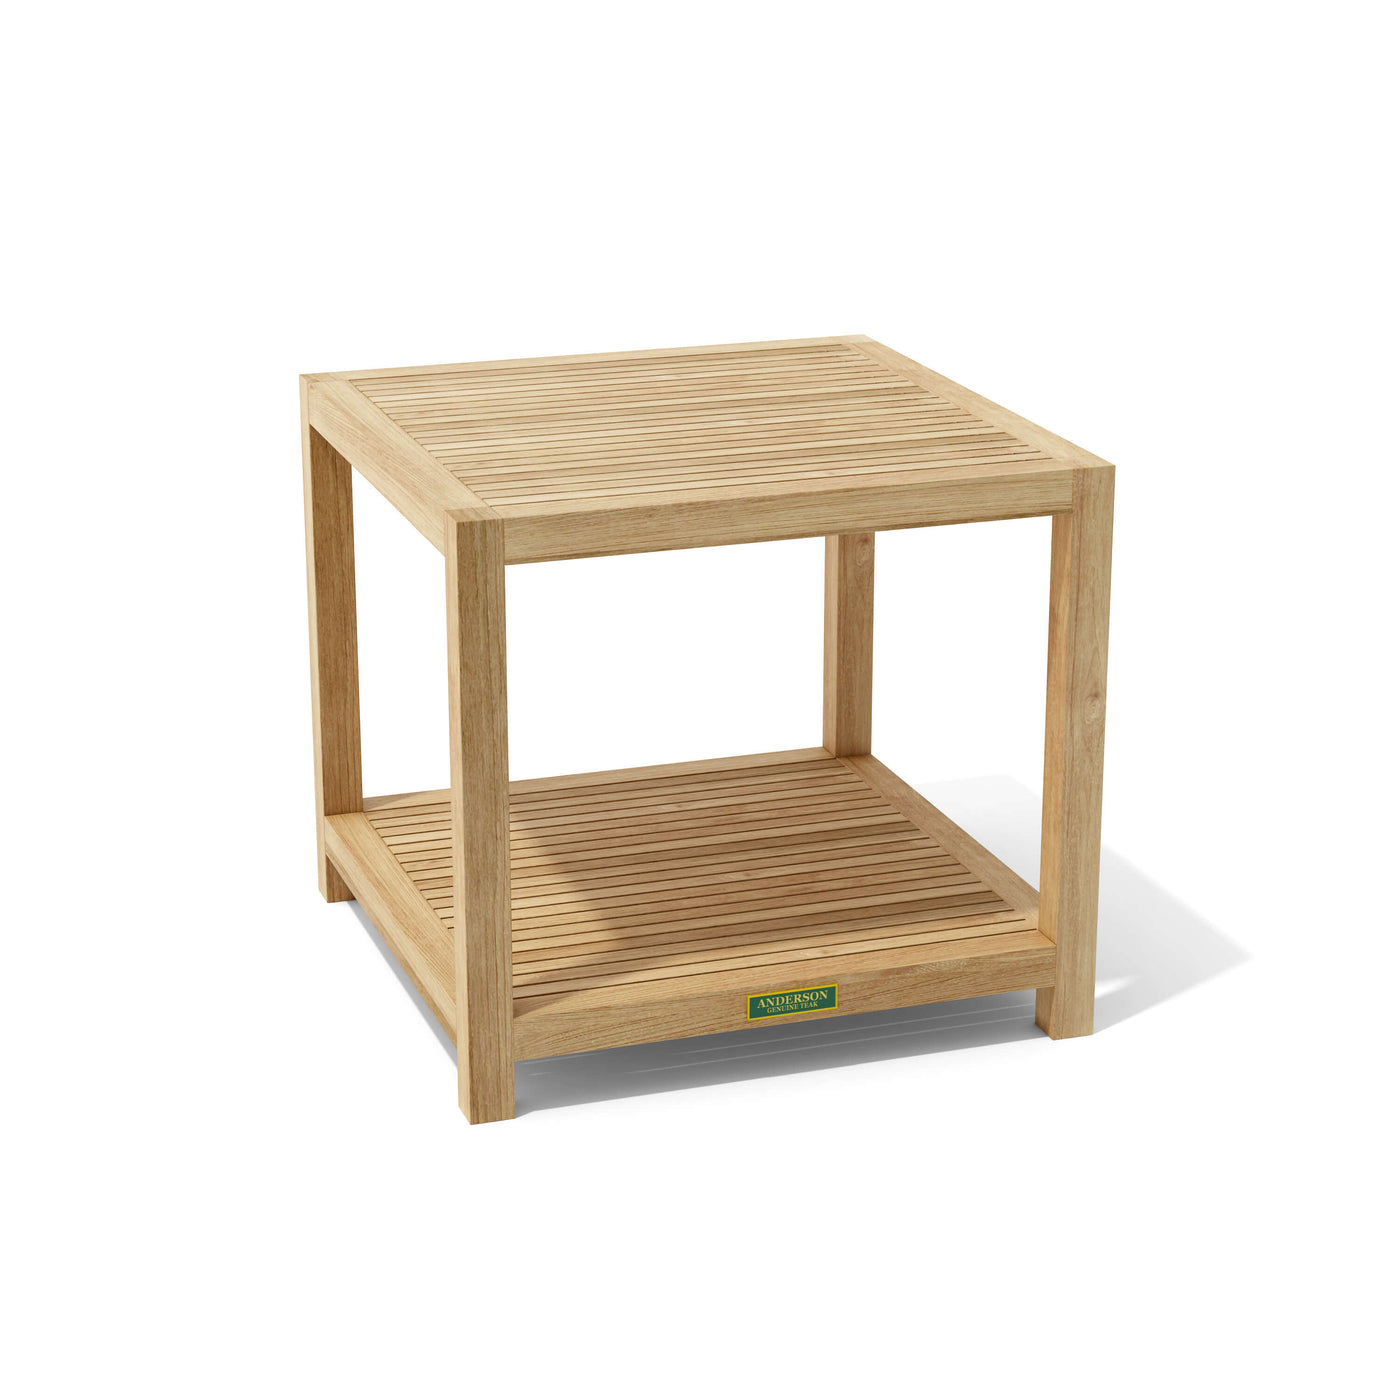 Glenmore Side Table with Shelf